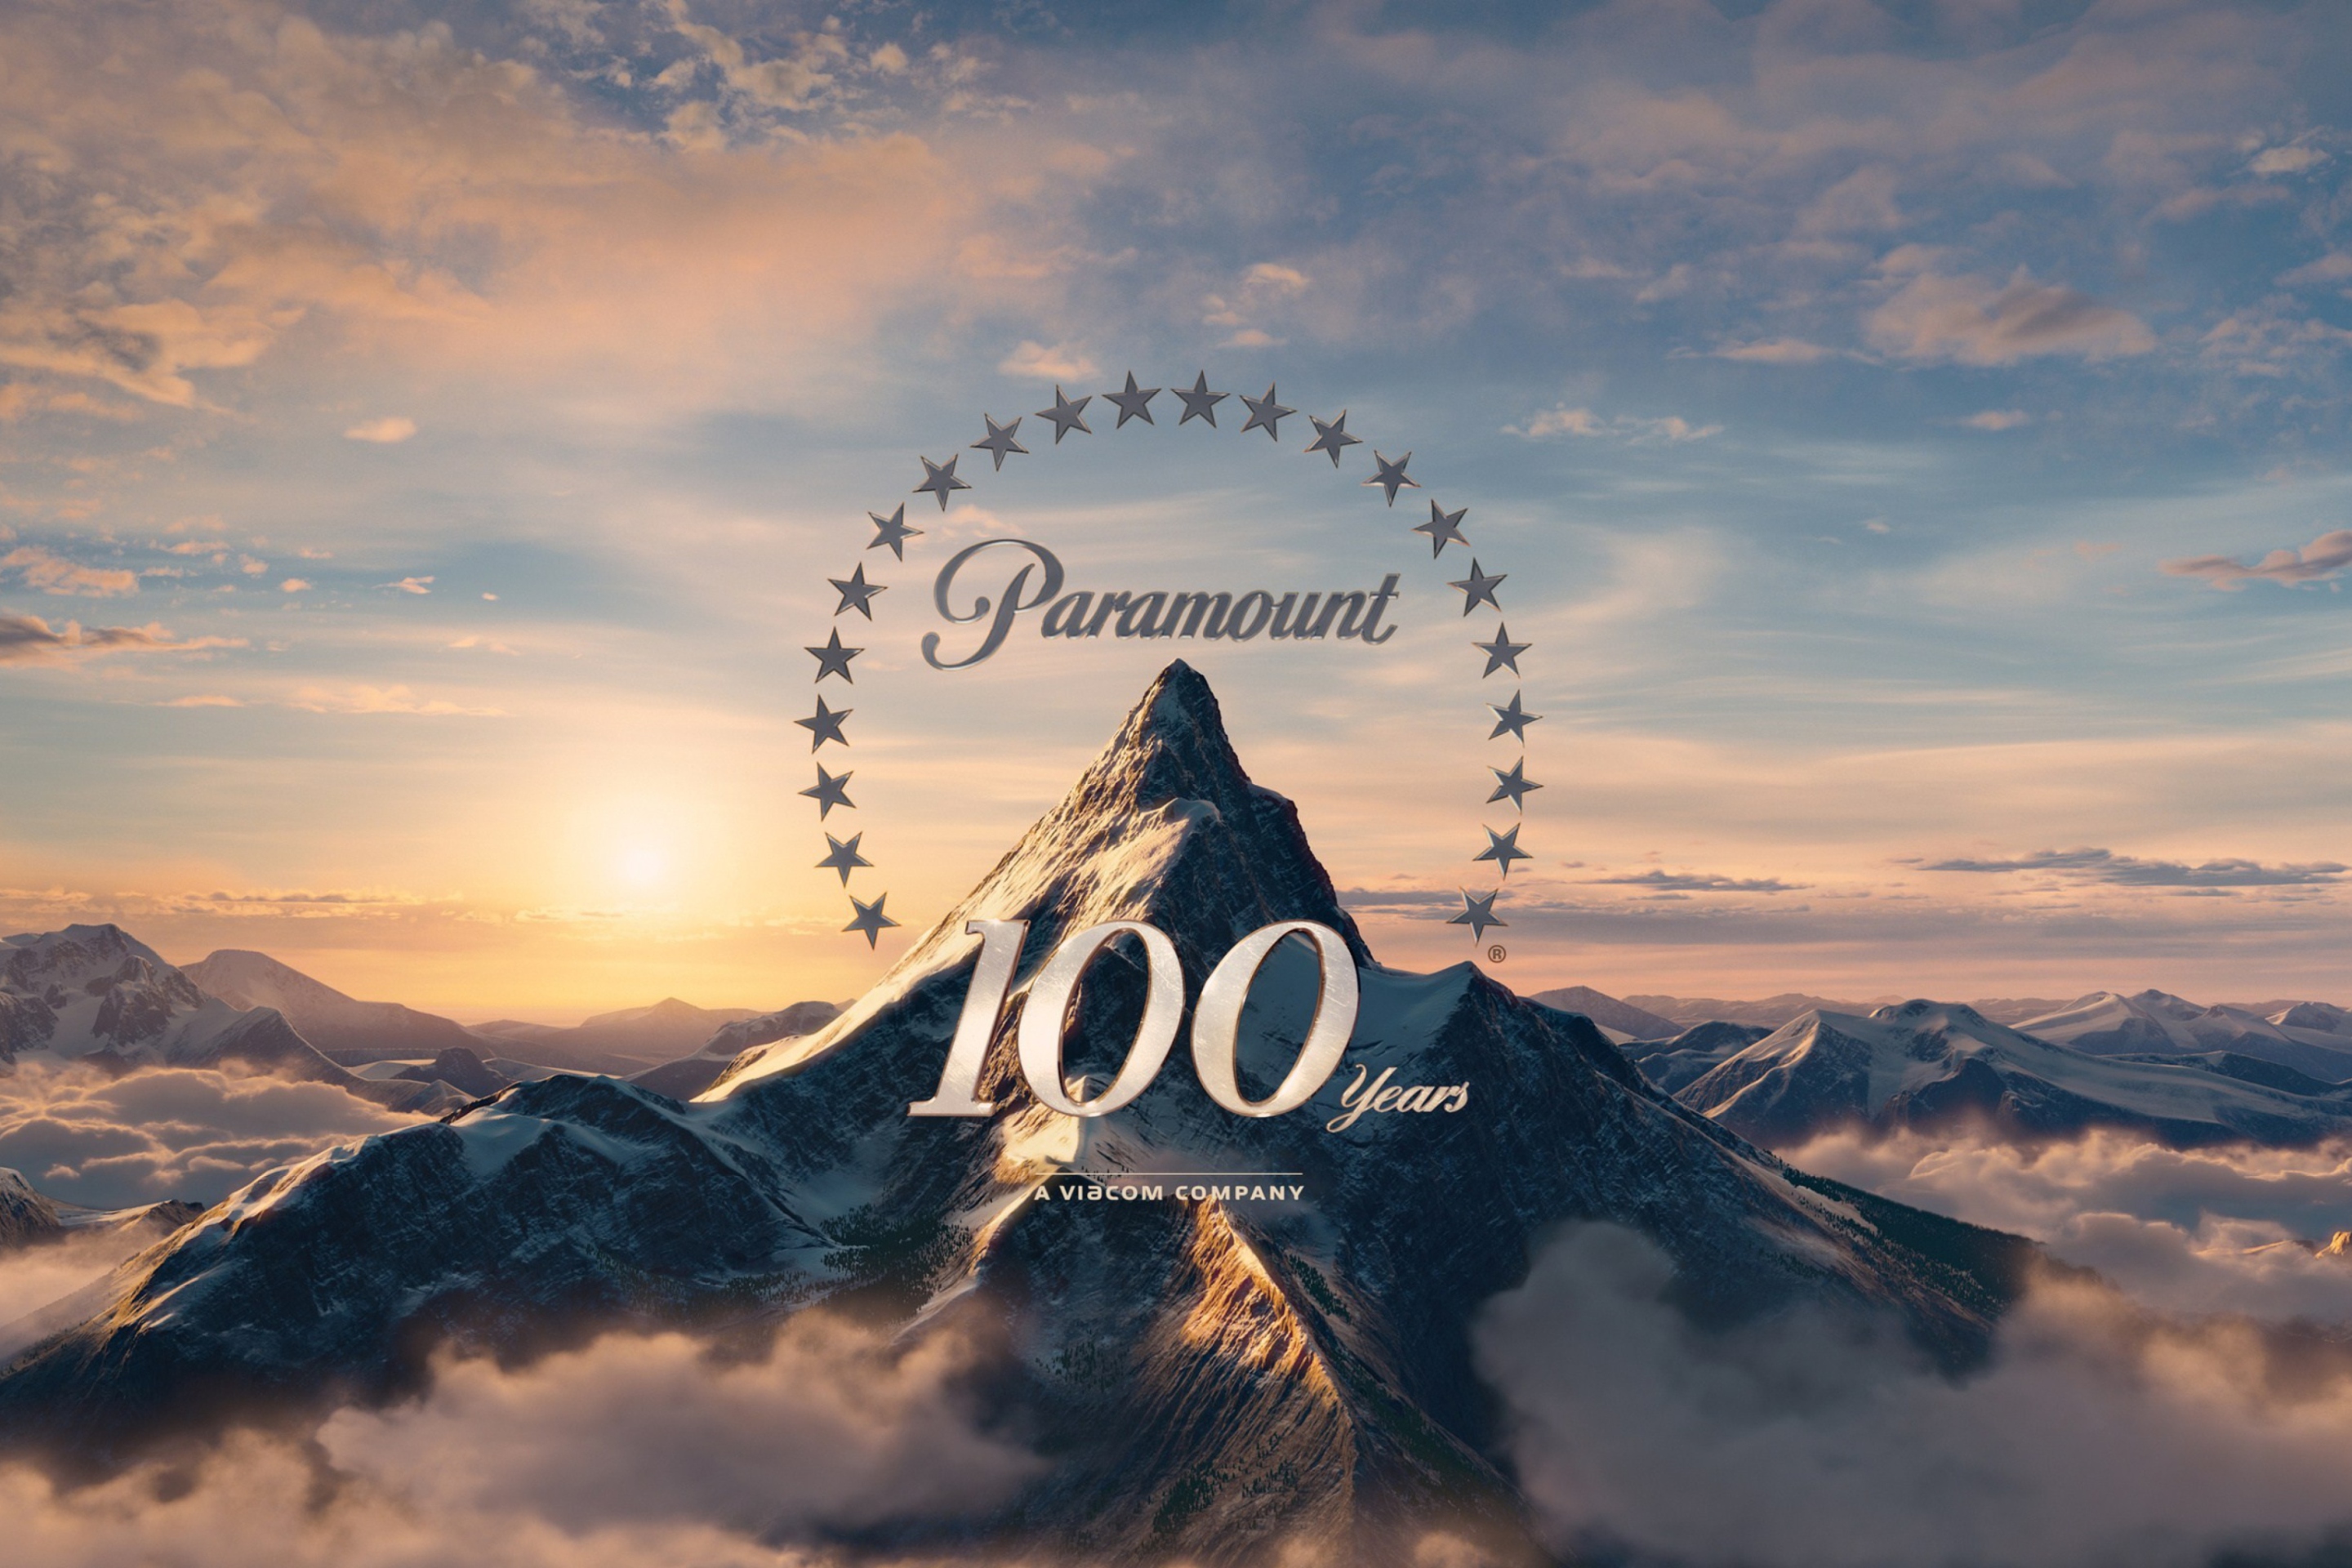 Das Paramount Pictures 100 Years Wallpaper 2880x1920